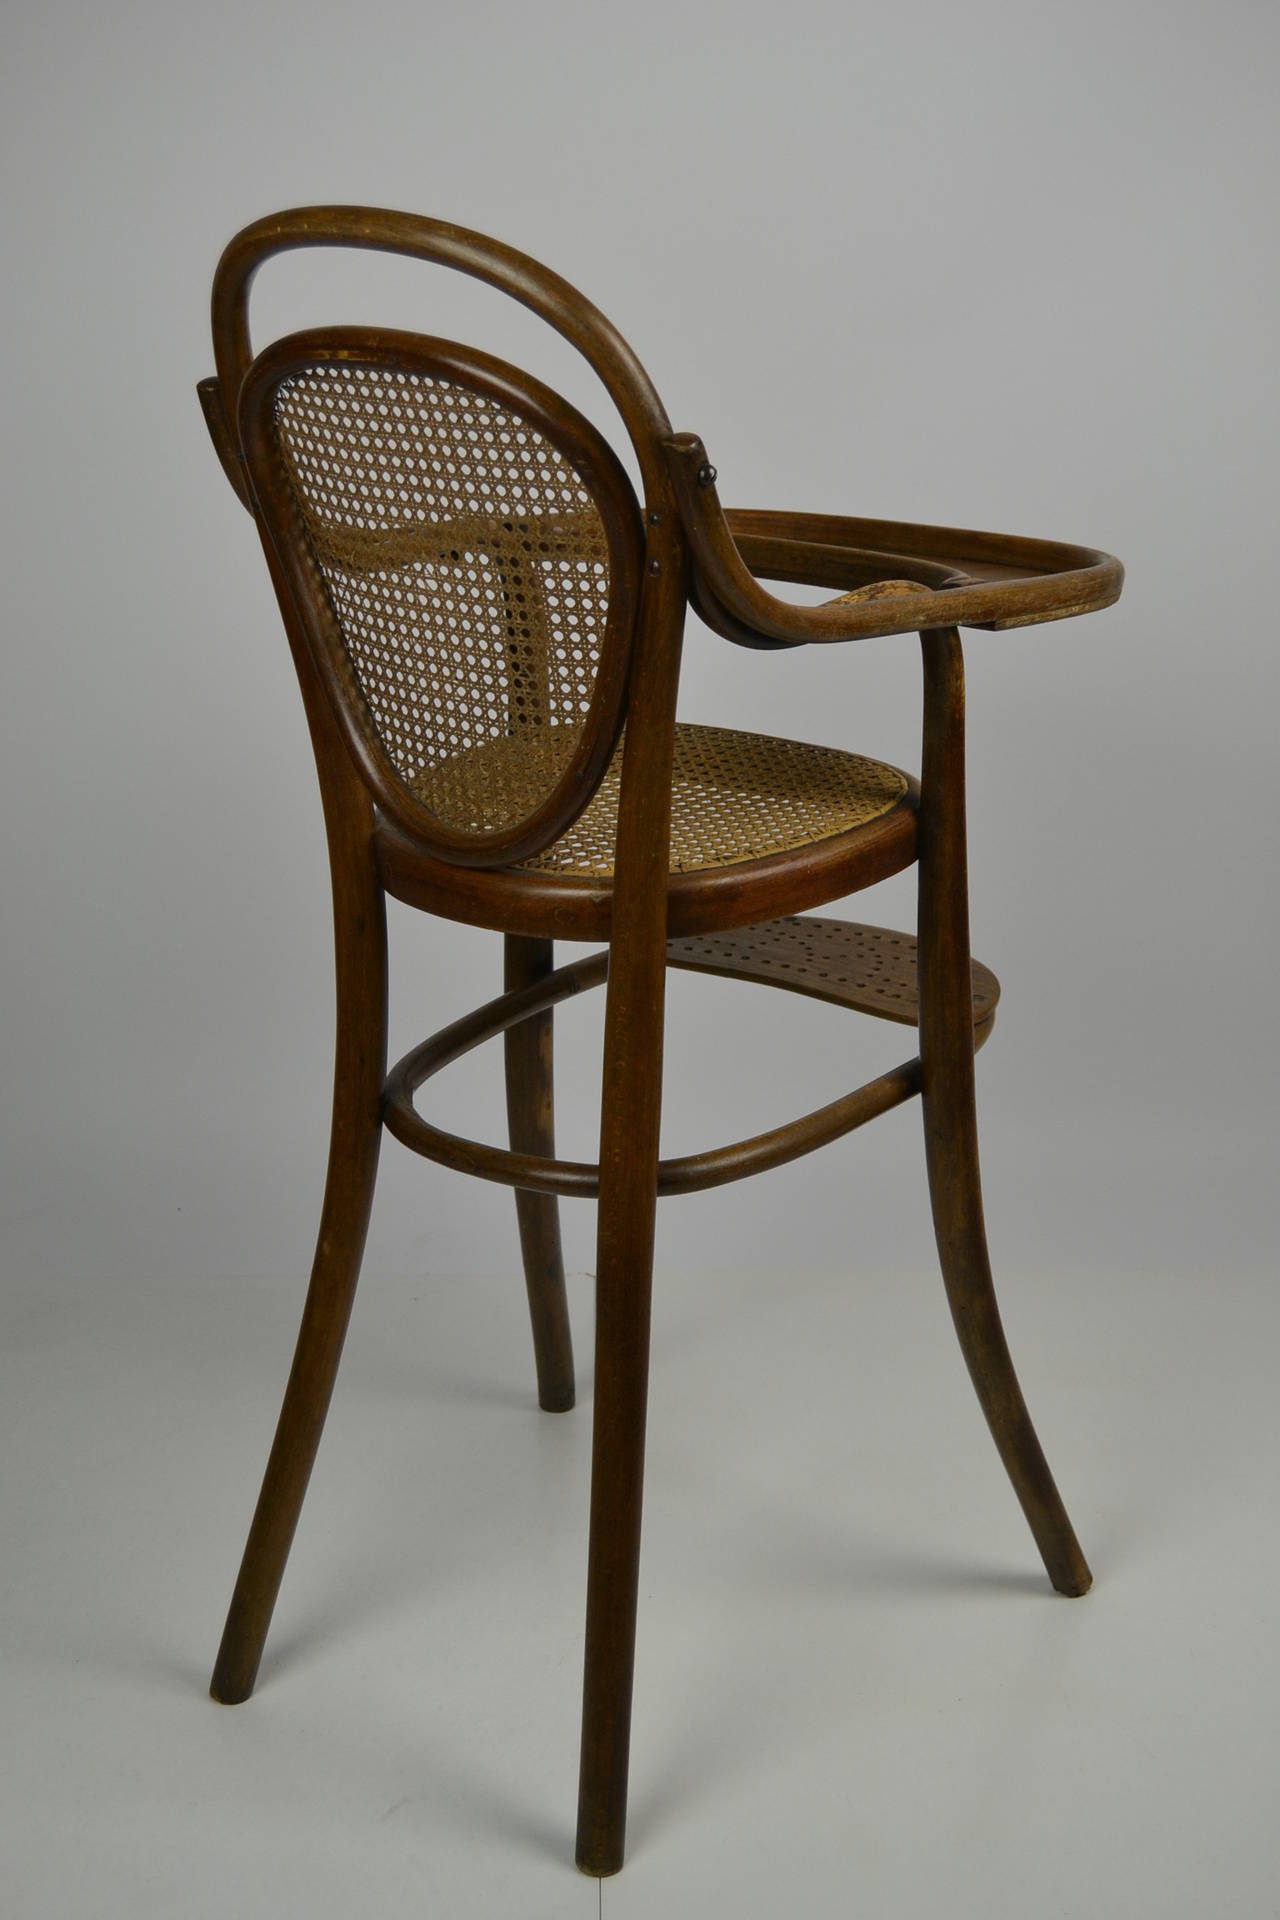 thonet childs chair